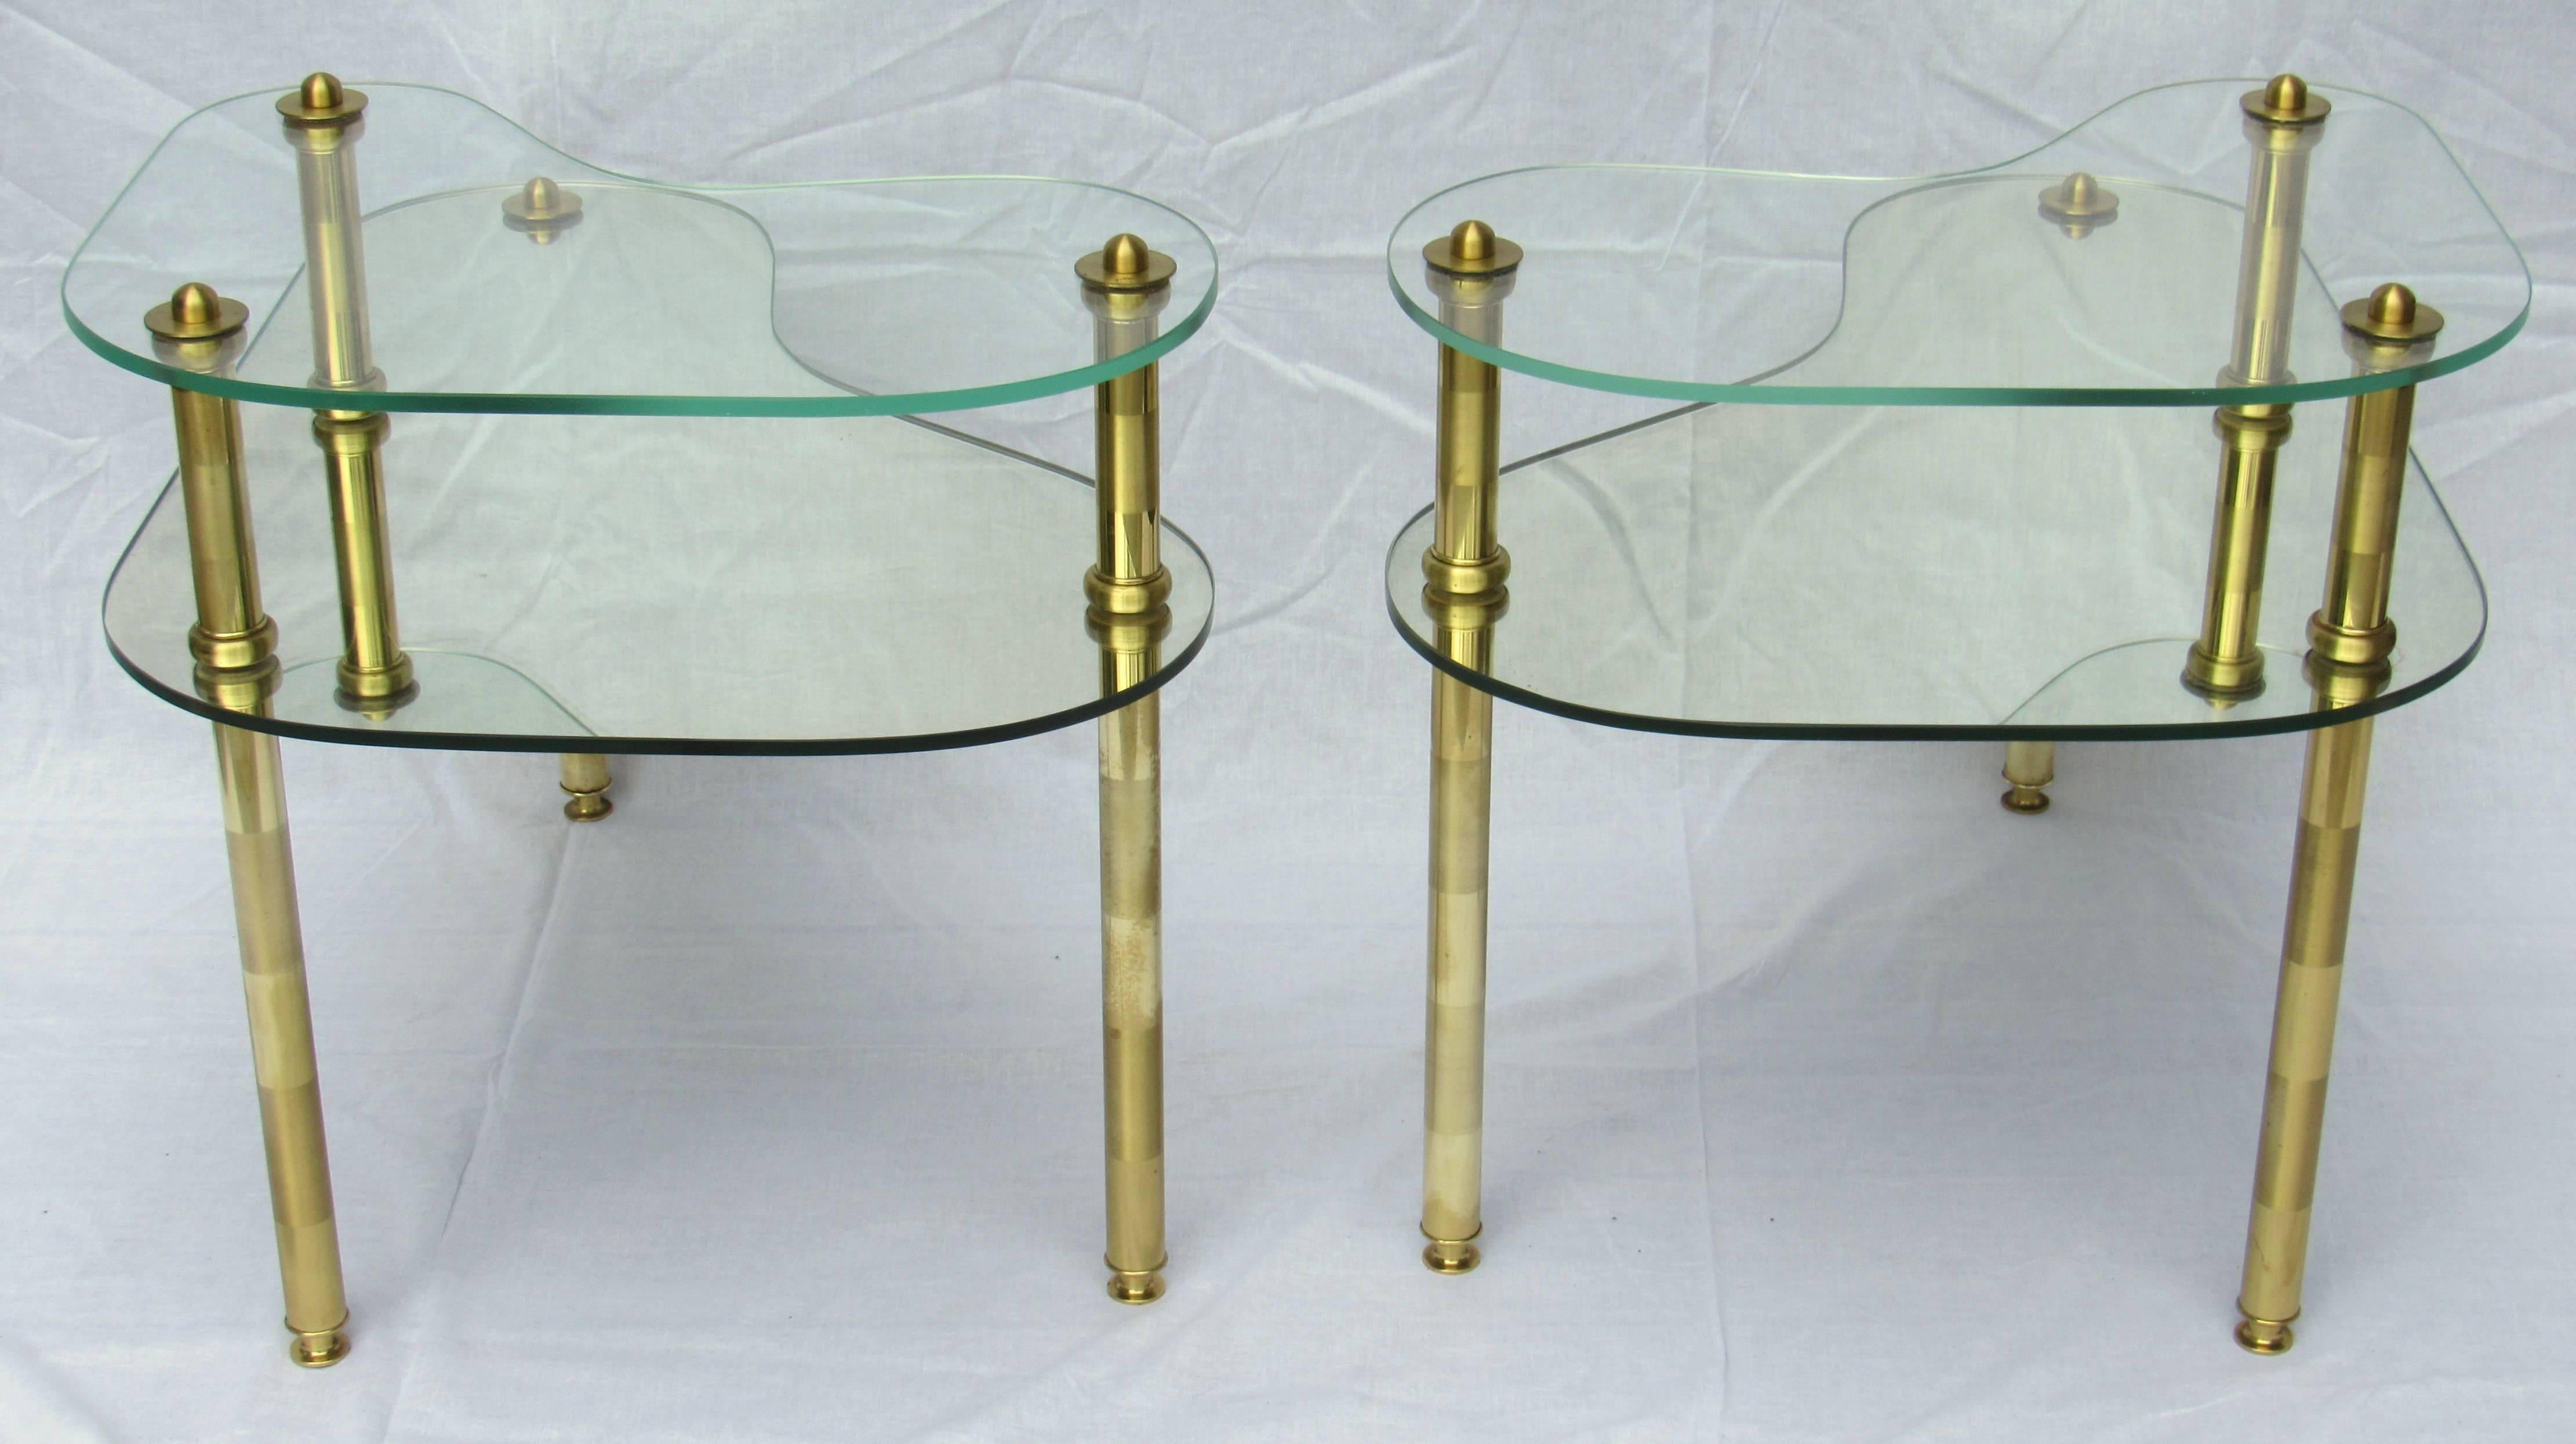 Semon Bache Pair of Chased Brass and Mirrored Glass End Tables from 1959 In Good Condition For Sale In Camden, ME